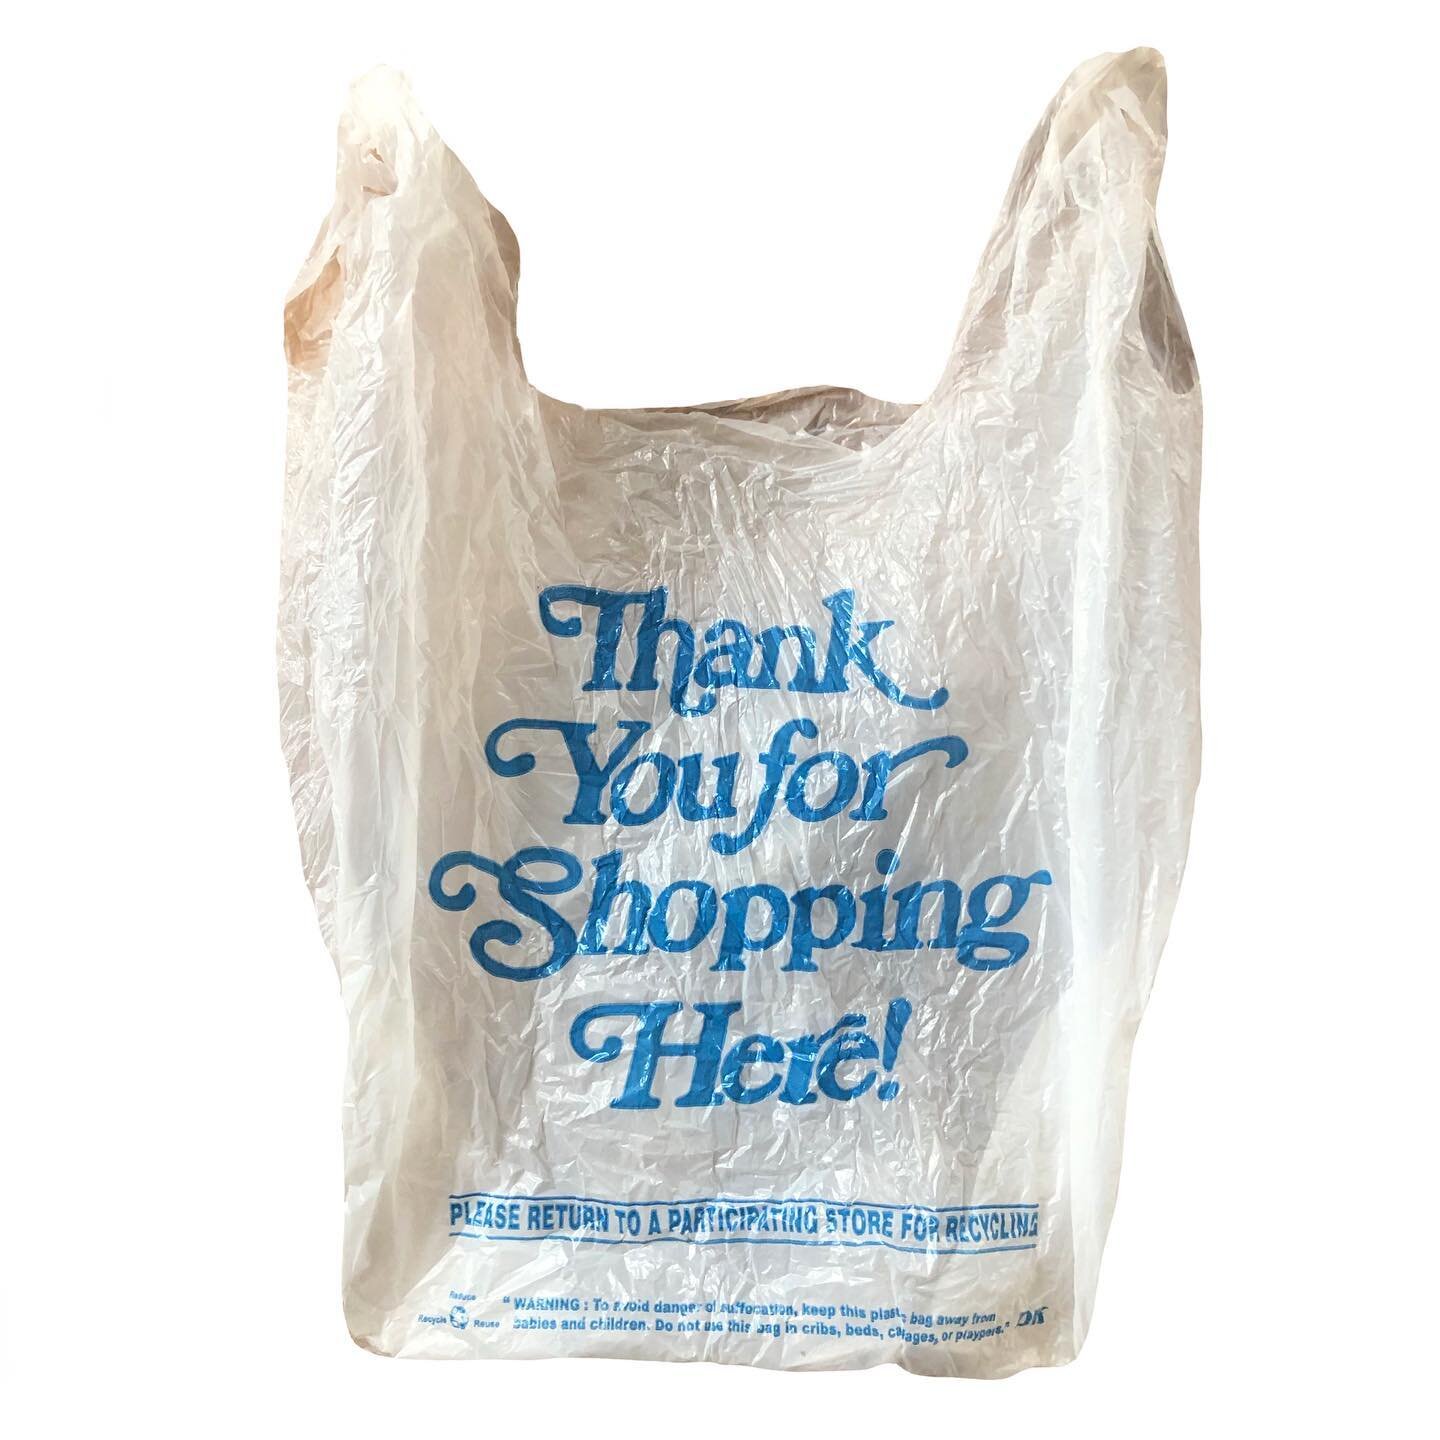 The bag with the light blue thank you